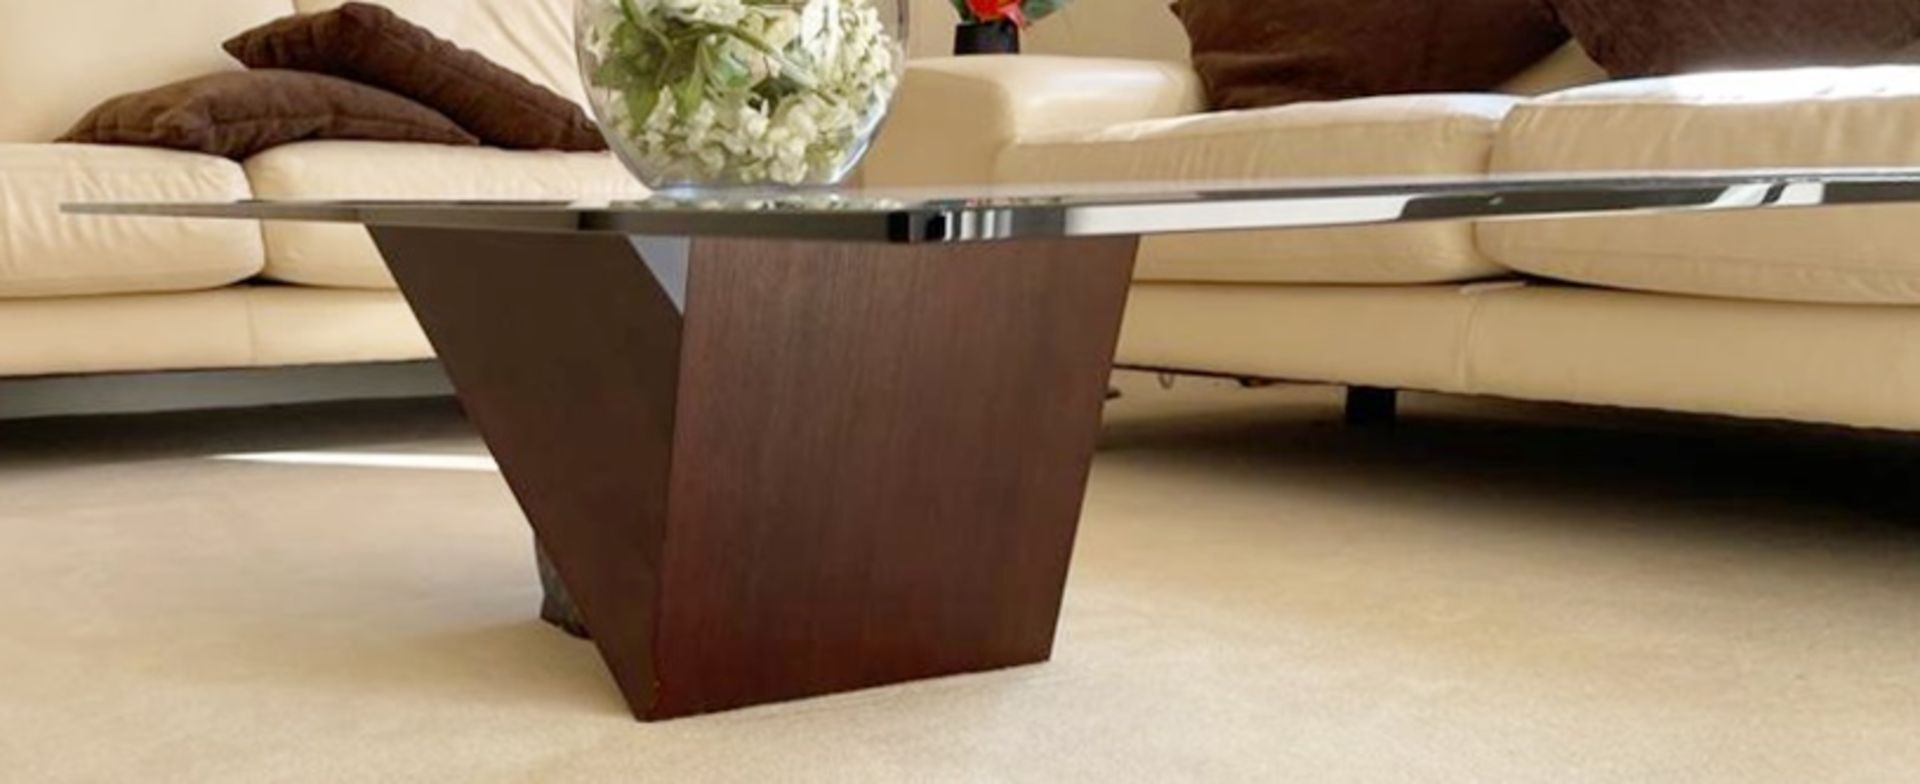 1 x Cattelan Italia Designer Coffee Table With Wenge Wood and Marble Base - NO VAT ON THE HAMMER - - Image 8 of 12